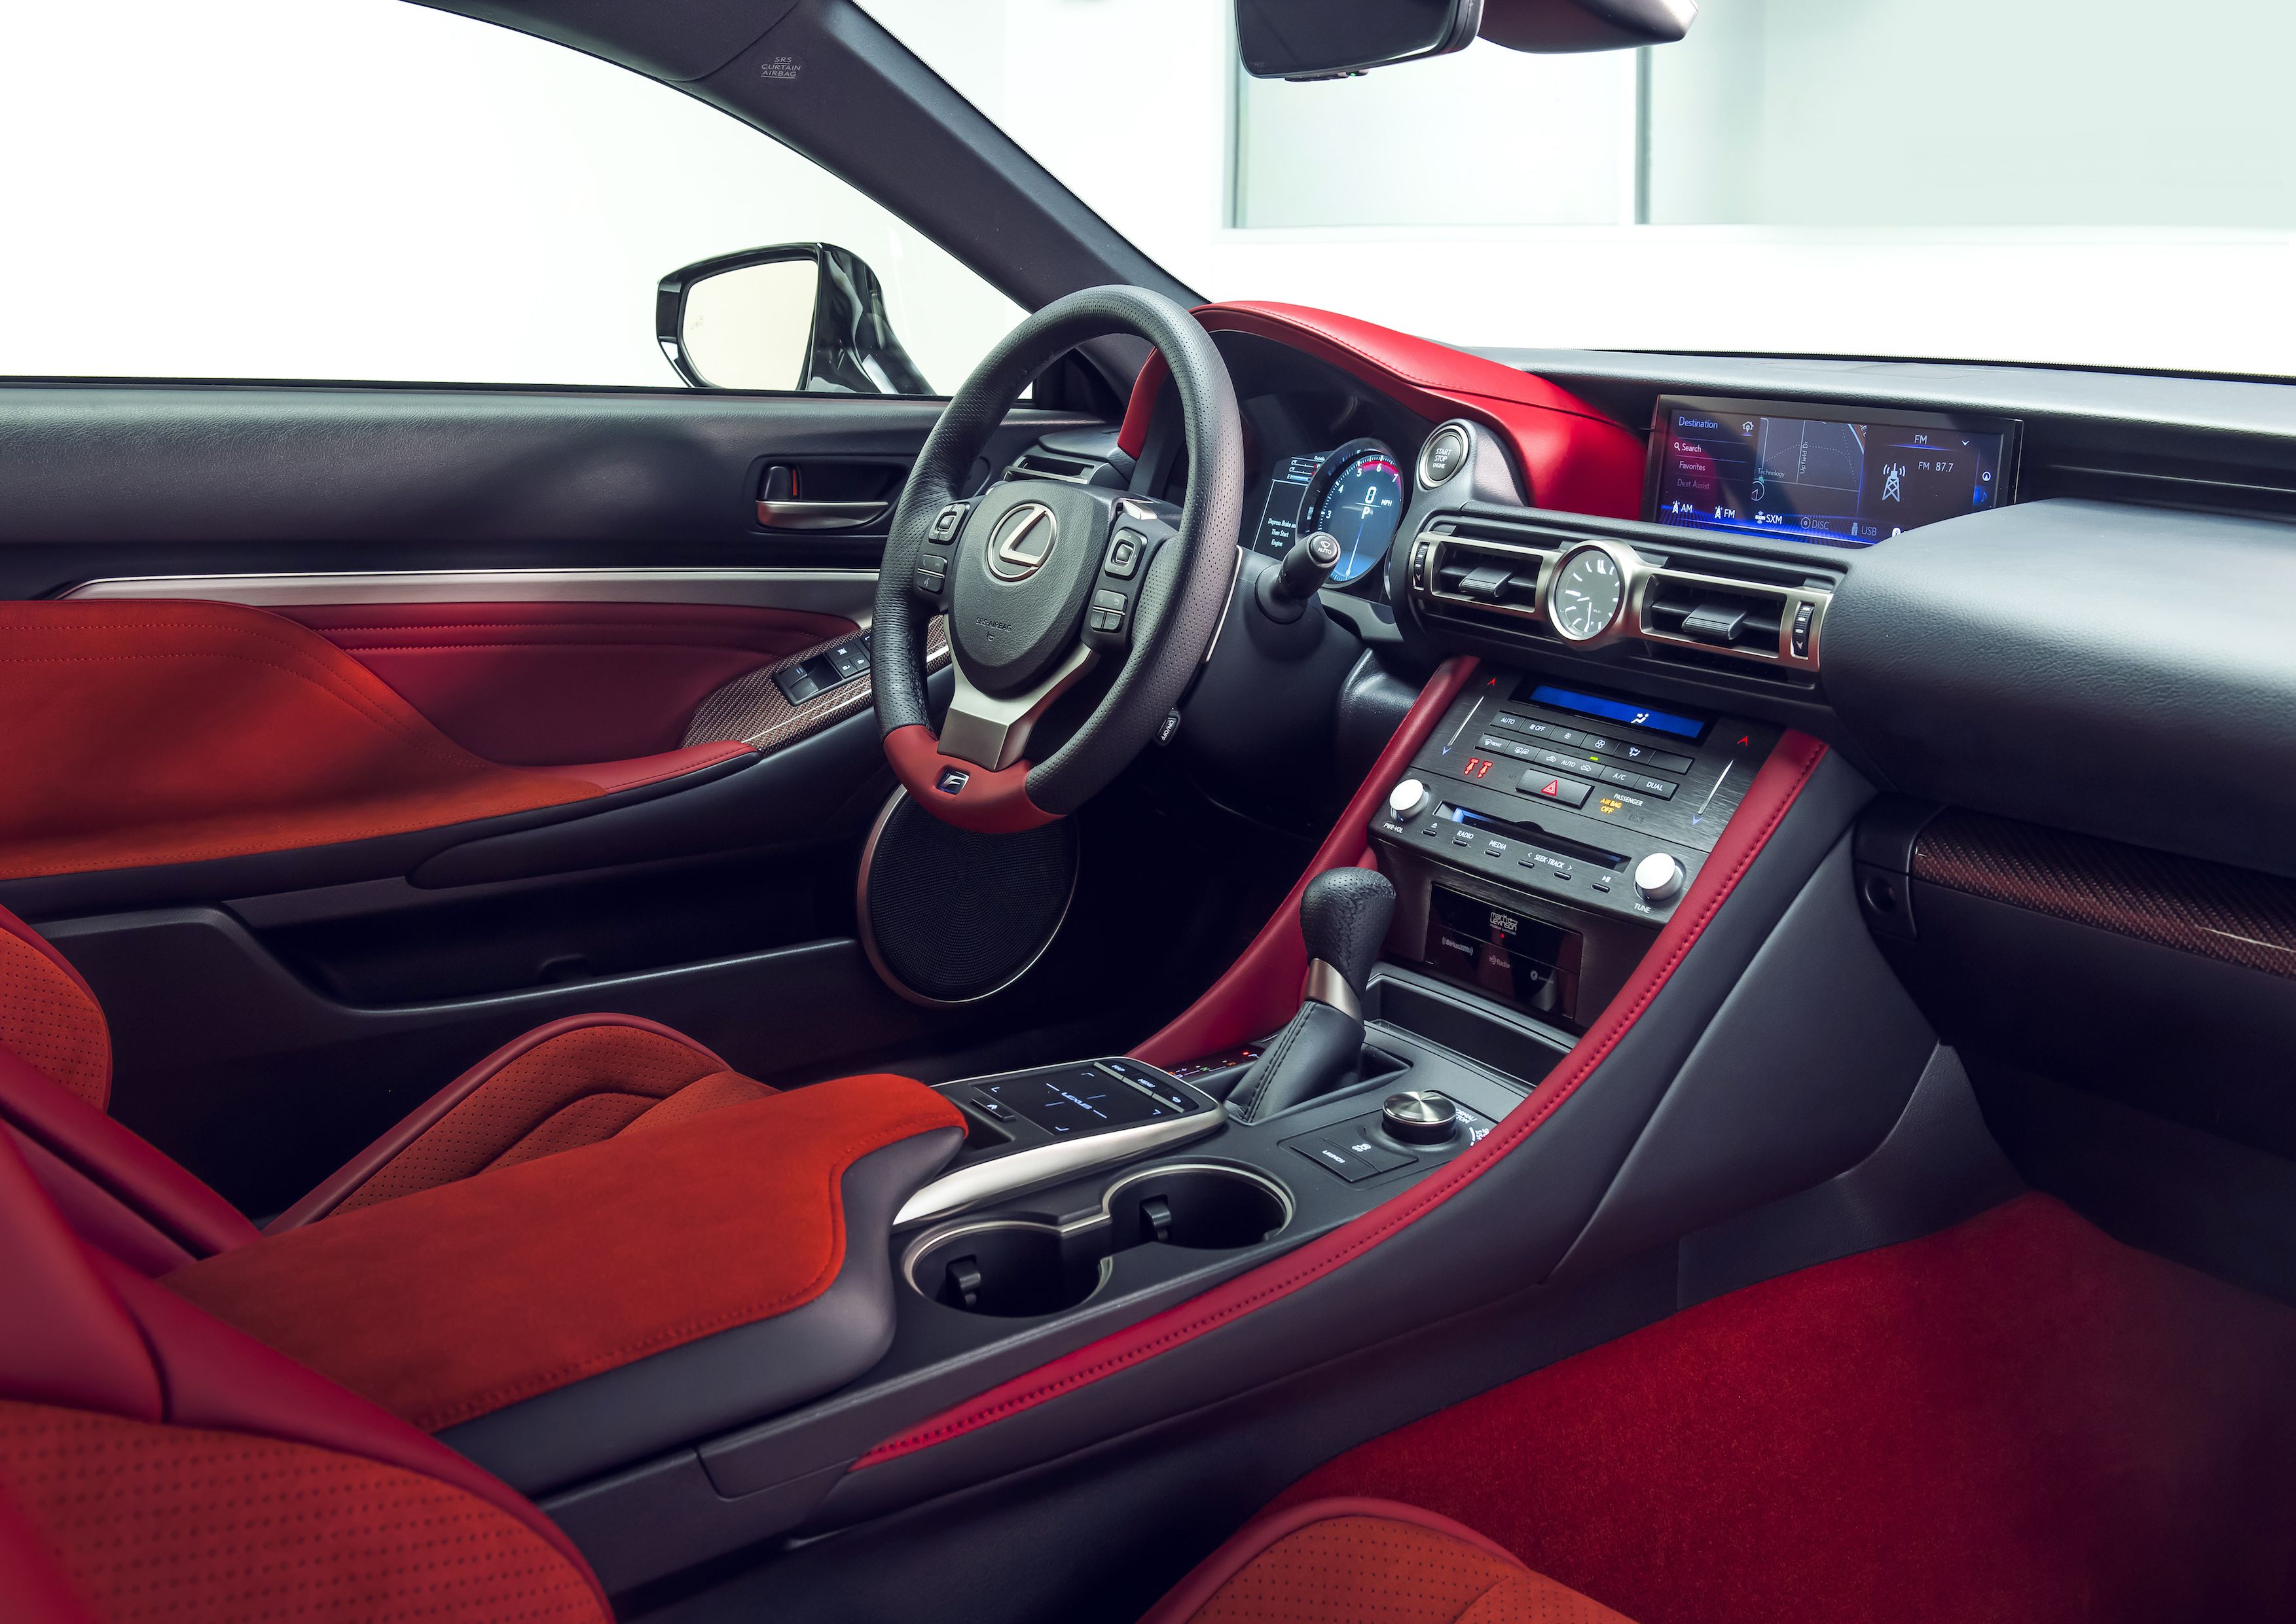 2021 Lexus RC F Review, Pricing, and Specs